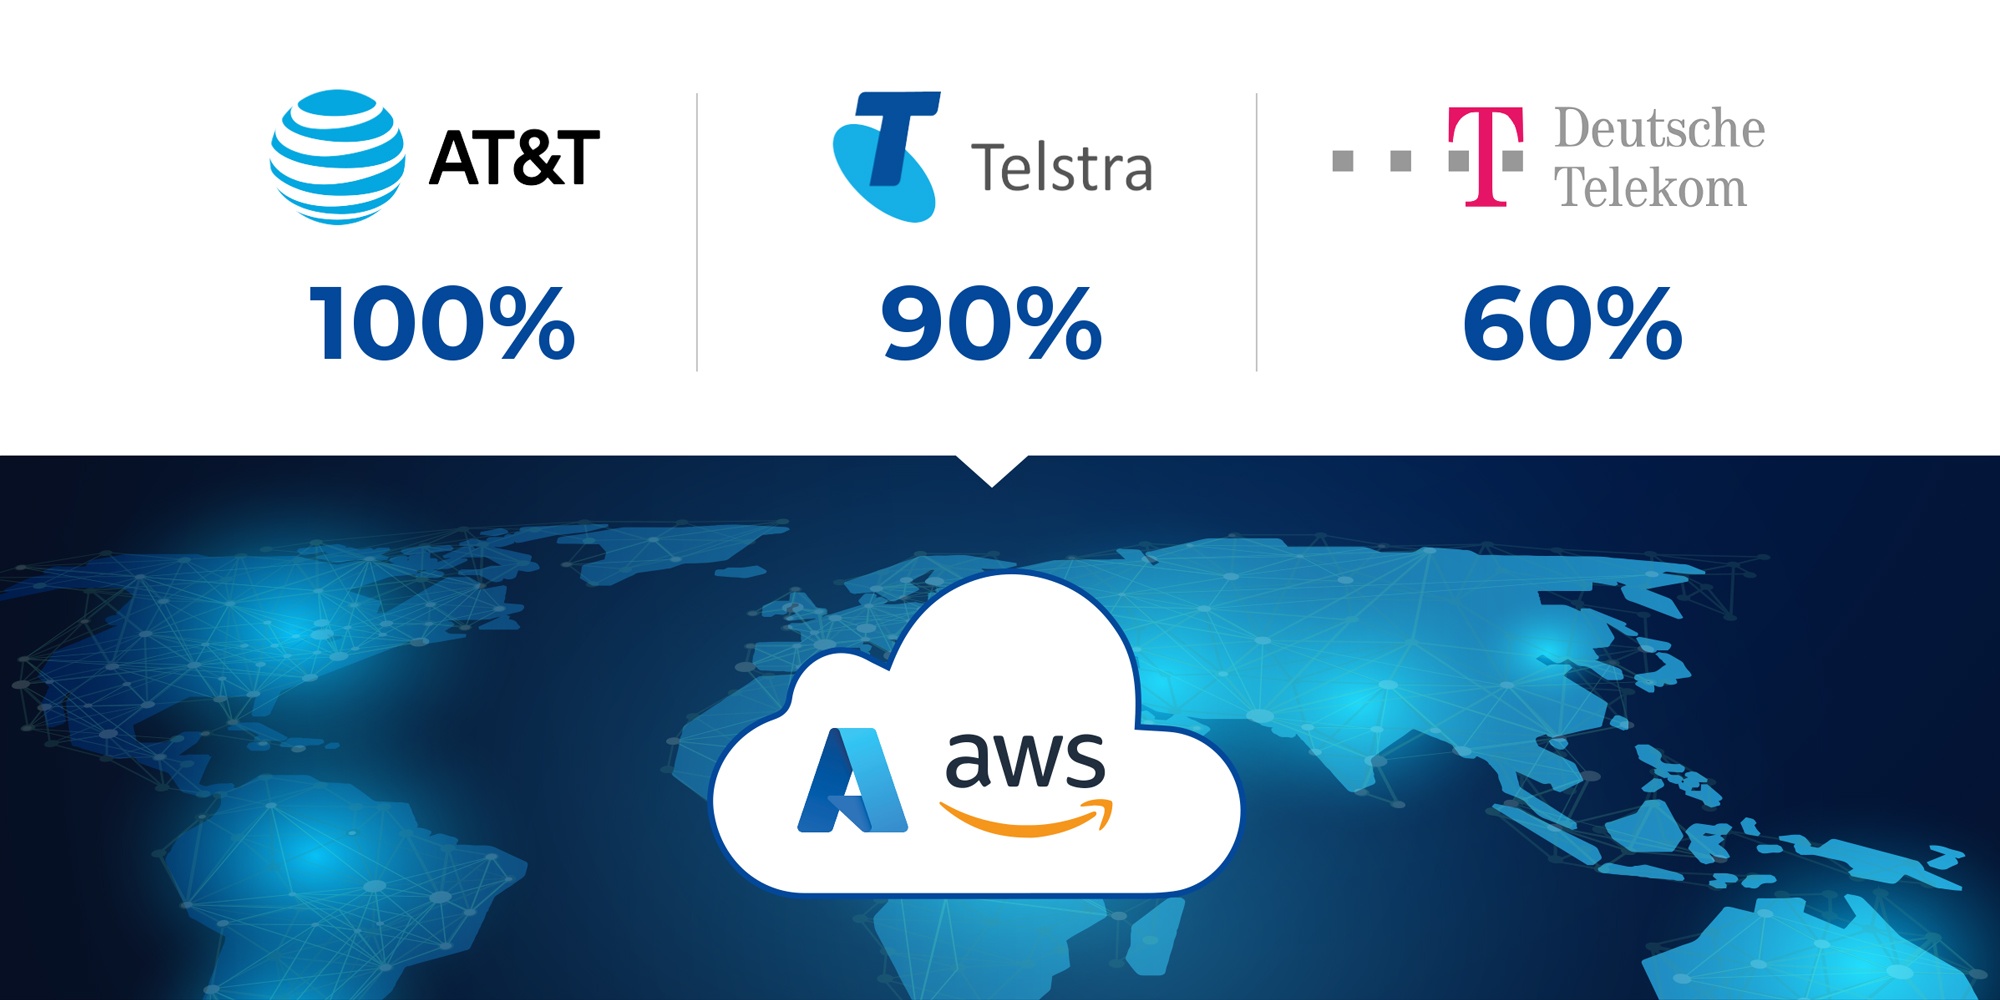 Telcos have moved various proportions of their infrastructure to the cloud